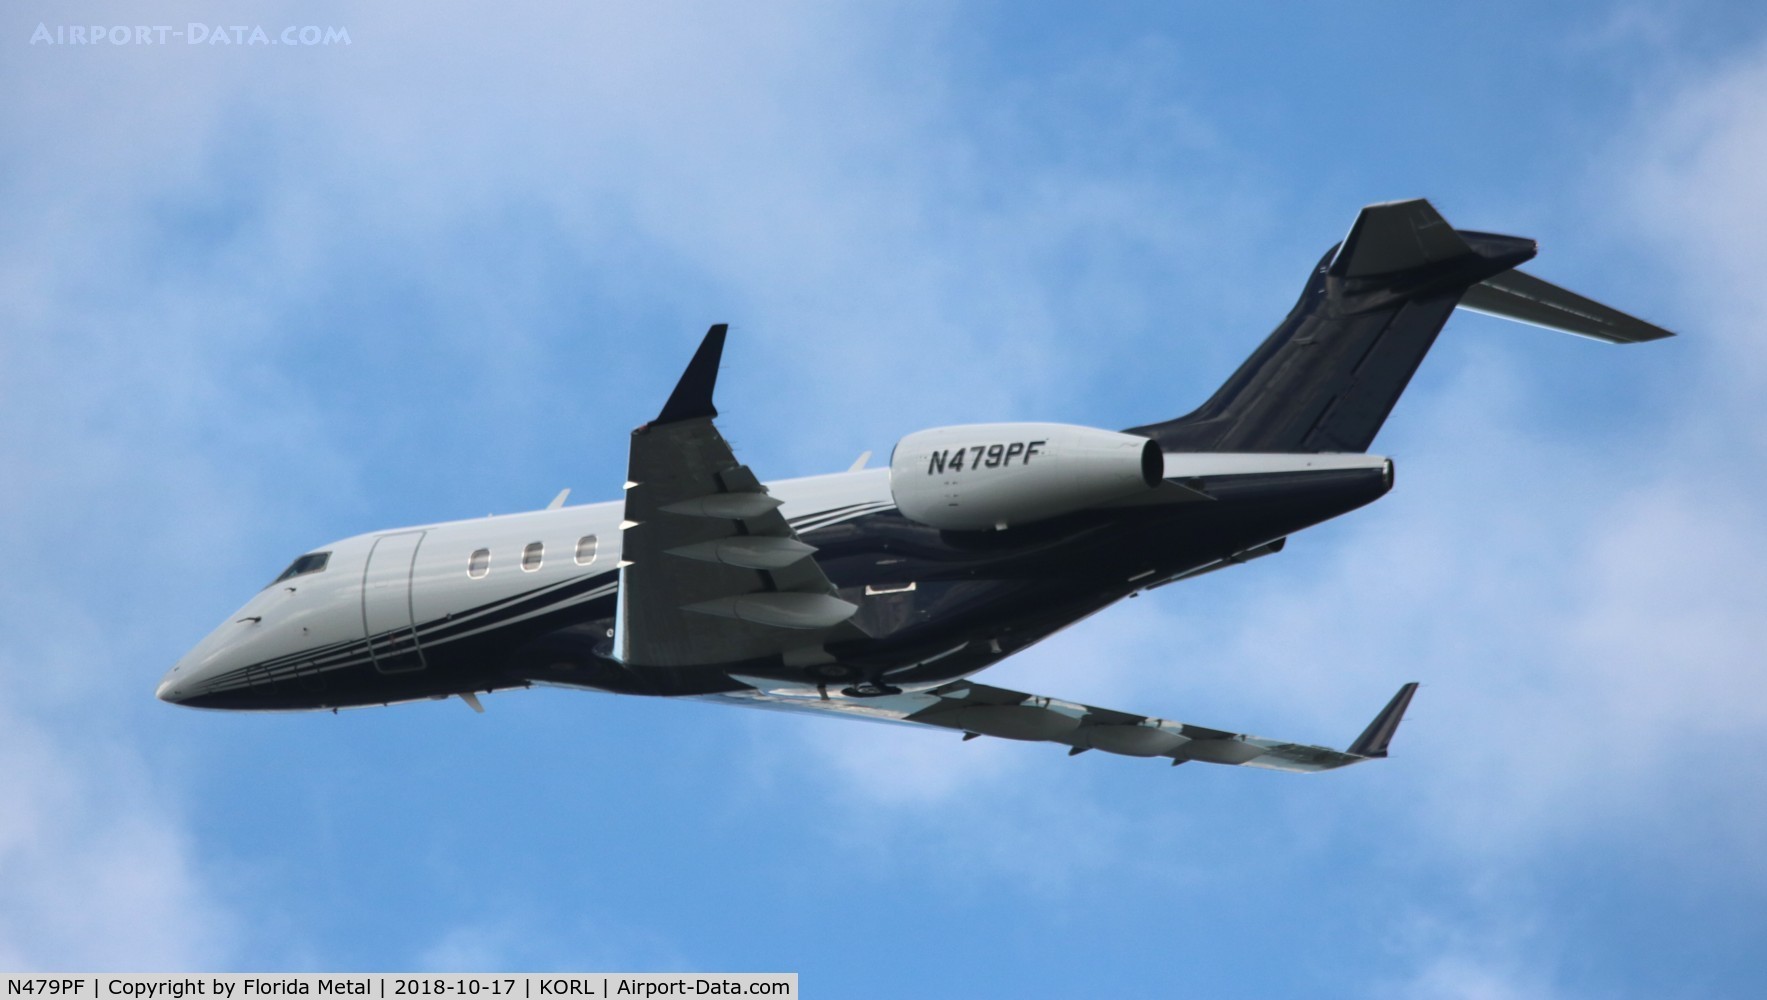 N479PF, 2009 Bombardier Challenger 300 (BD-100-1A10) C/N 20255, Challenger 300 zx